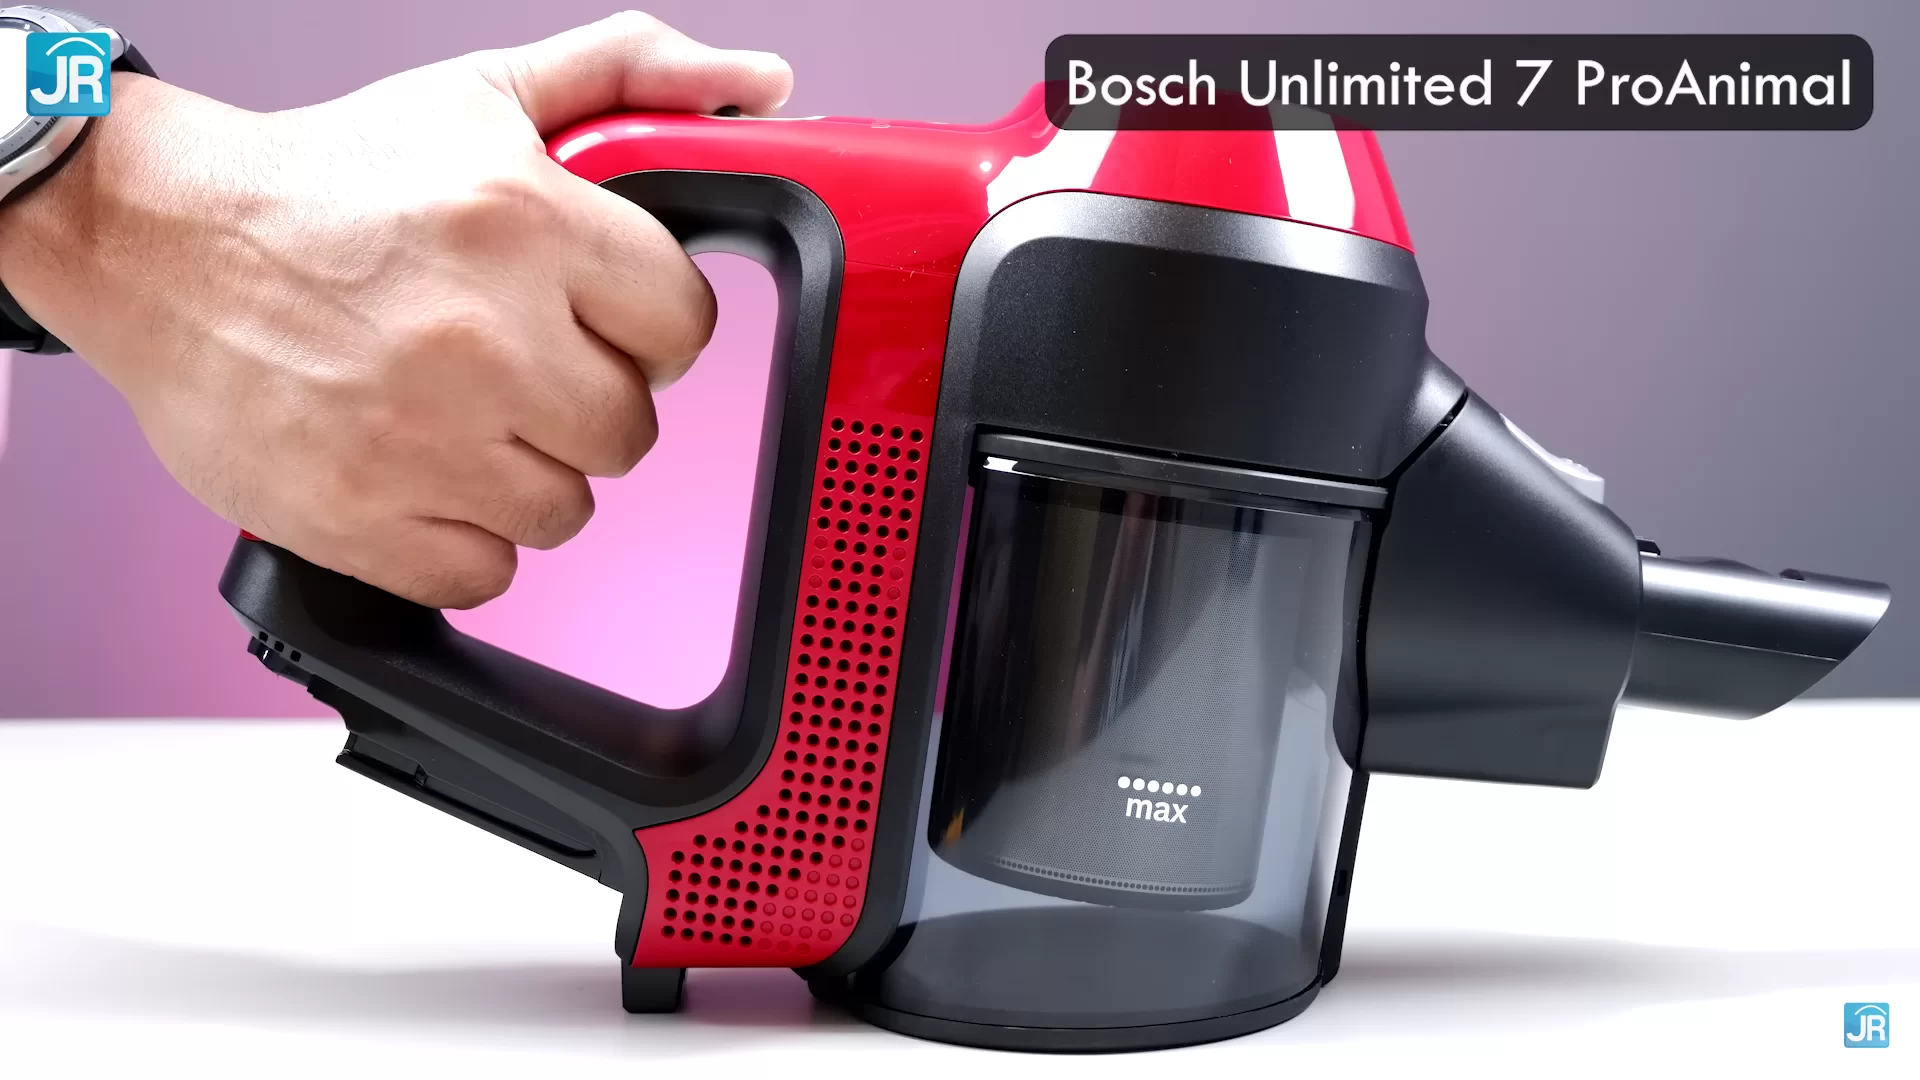 Review Bosch Unlimited 7 ProAnimal